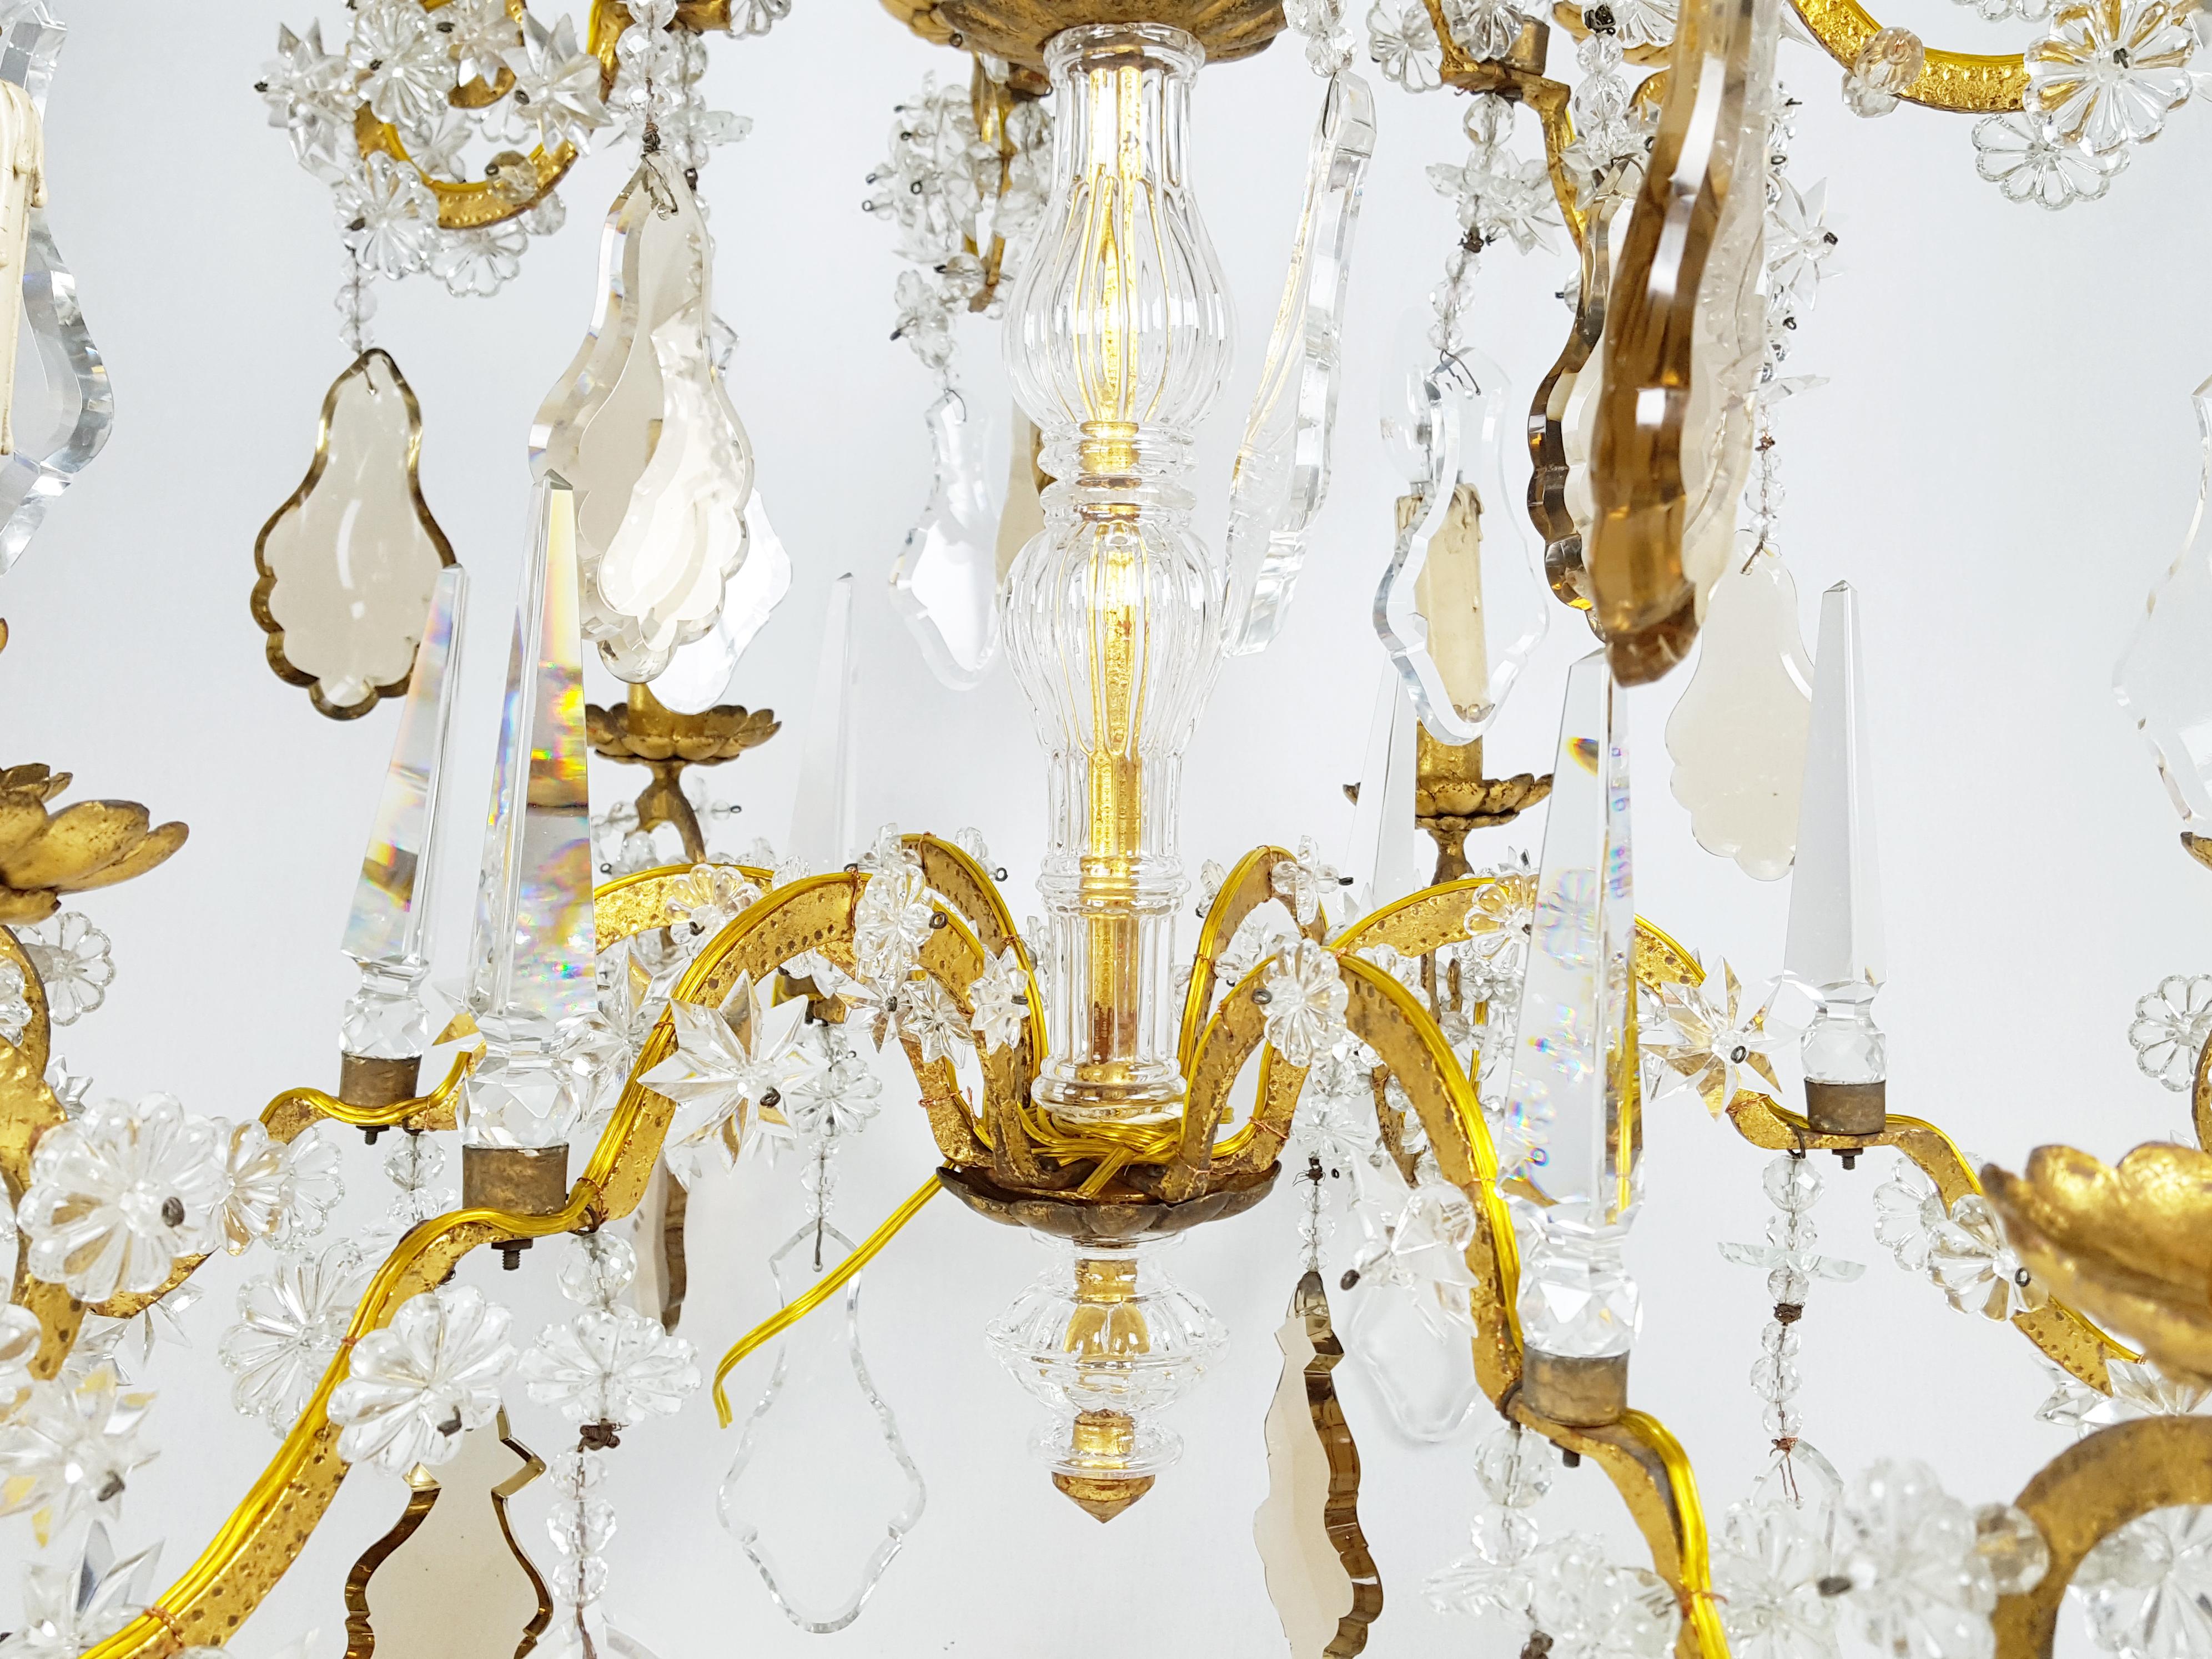 This large and fine 12-lights chandelier was manufactured in Italy in the 1930s. It consists of a golden leaf metal structure with different faceted crystal elements such as obelisks, stars, flowers and crystal drops. The golden leaf metal structure